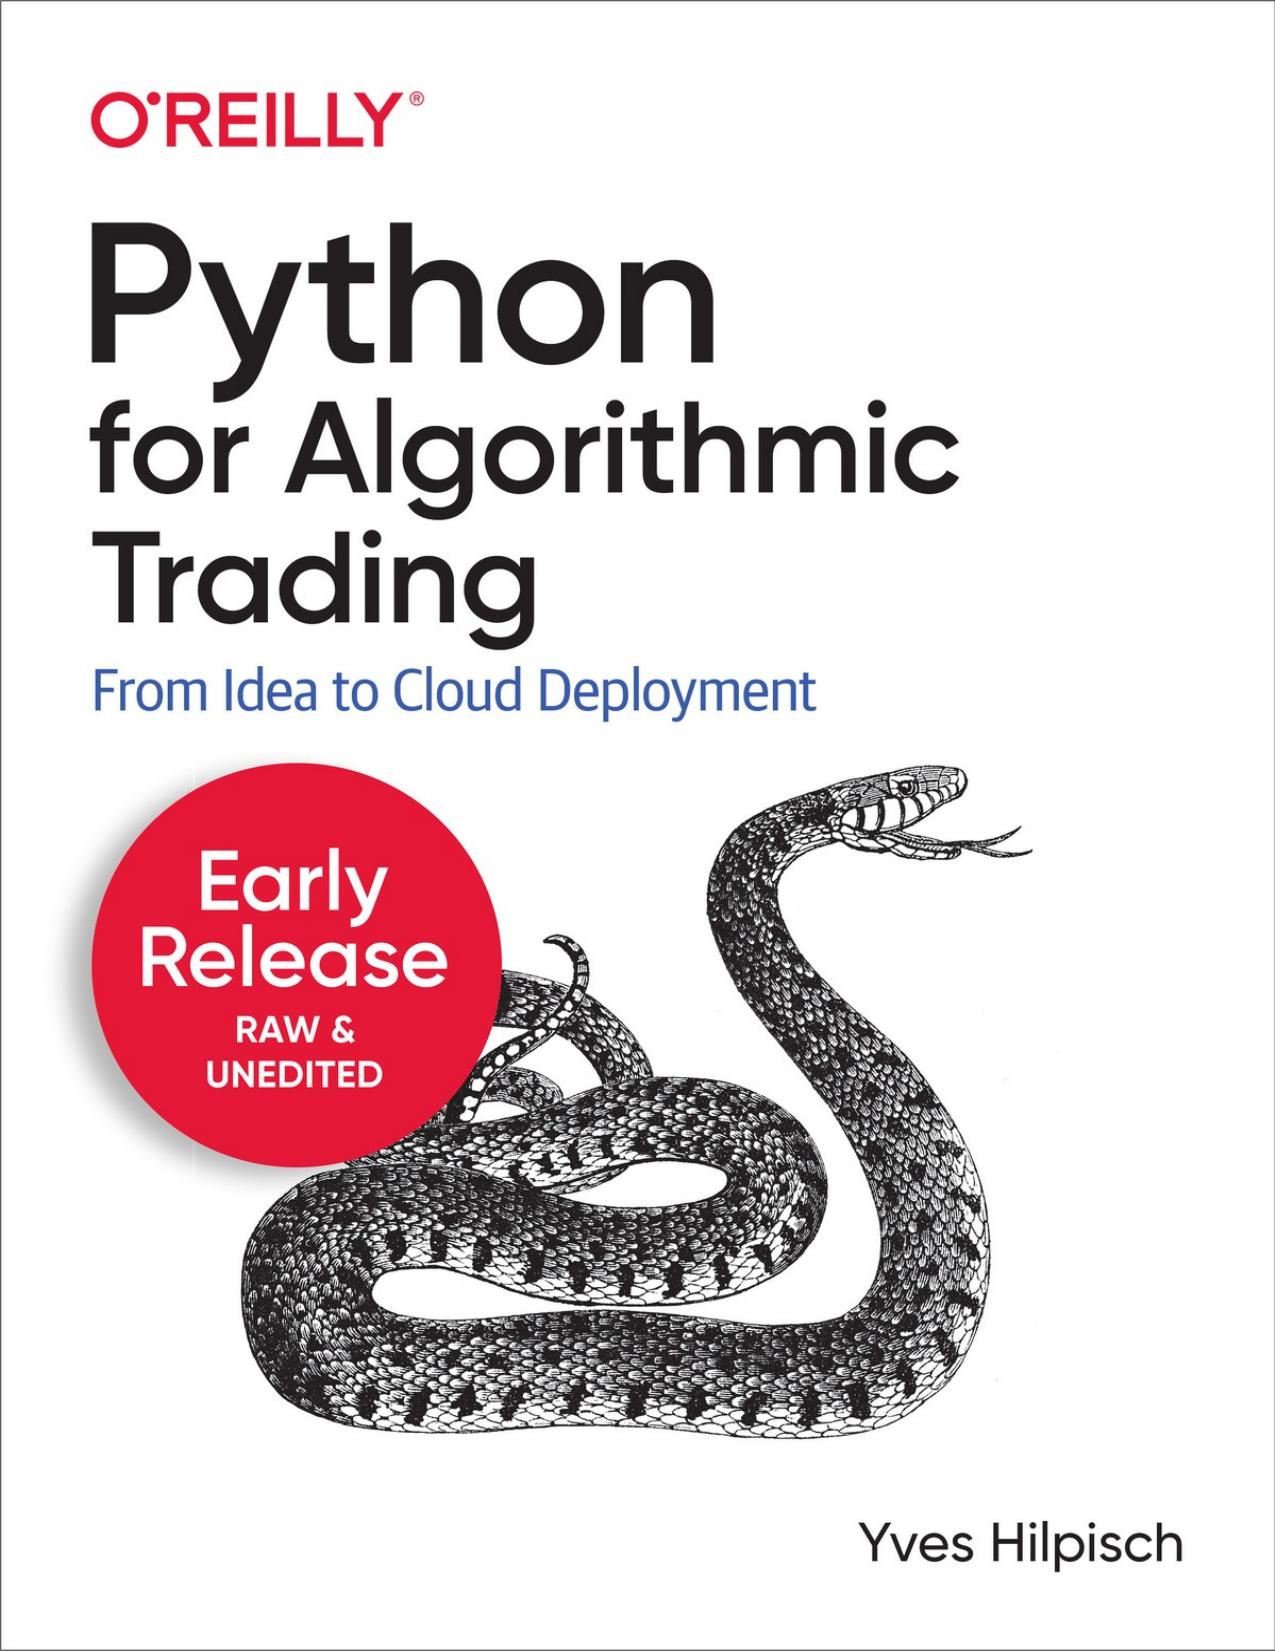 Python for Algorithmic Trading by Yves Hilpisch